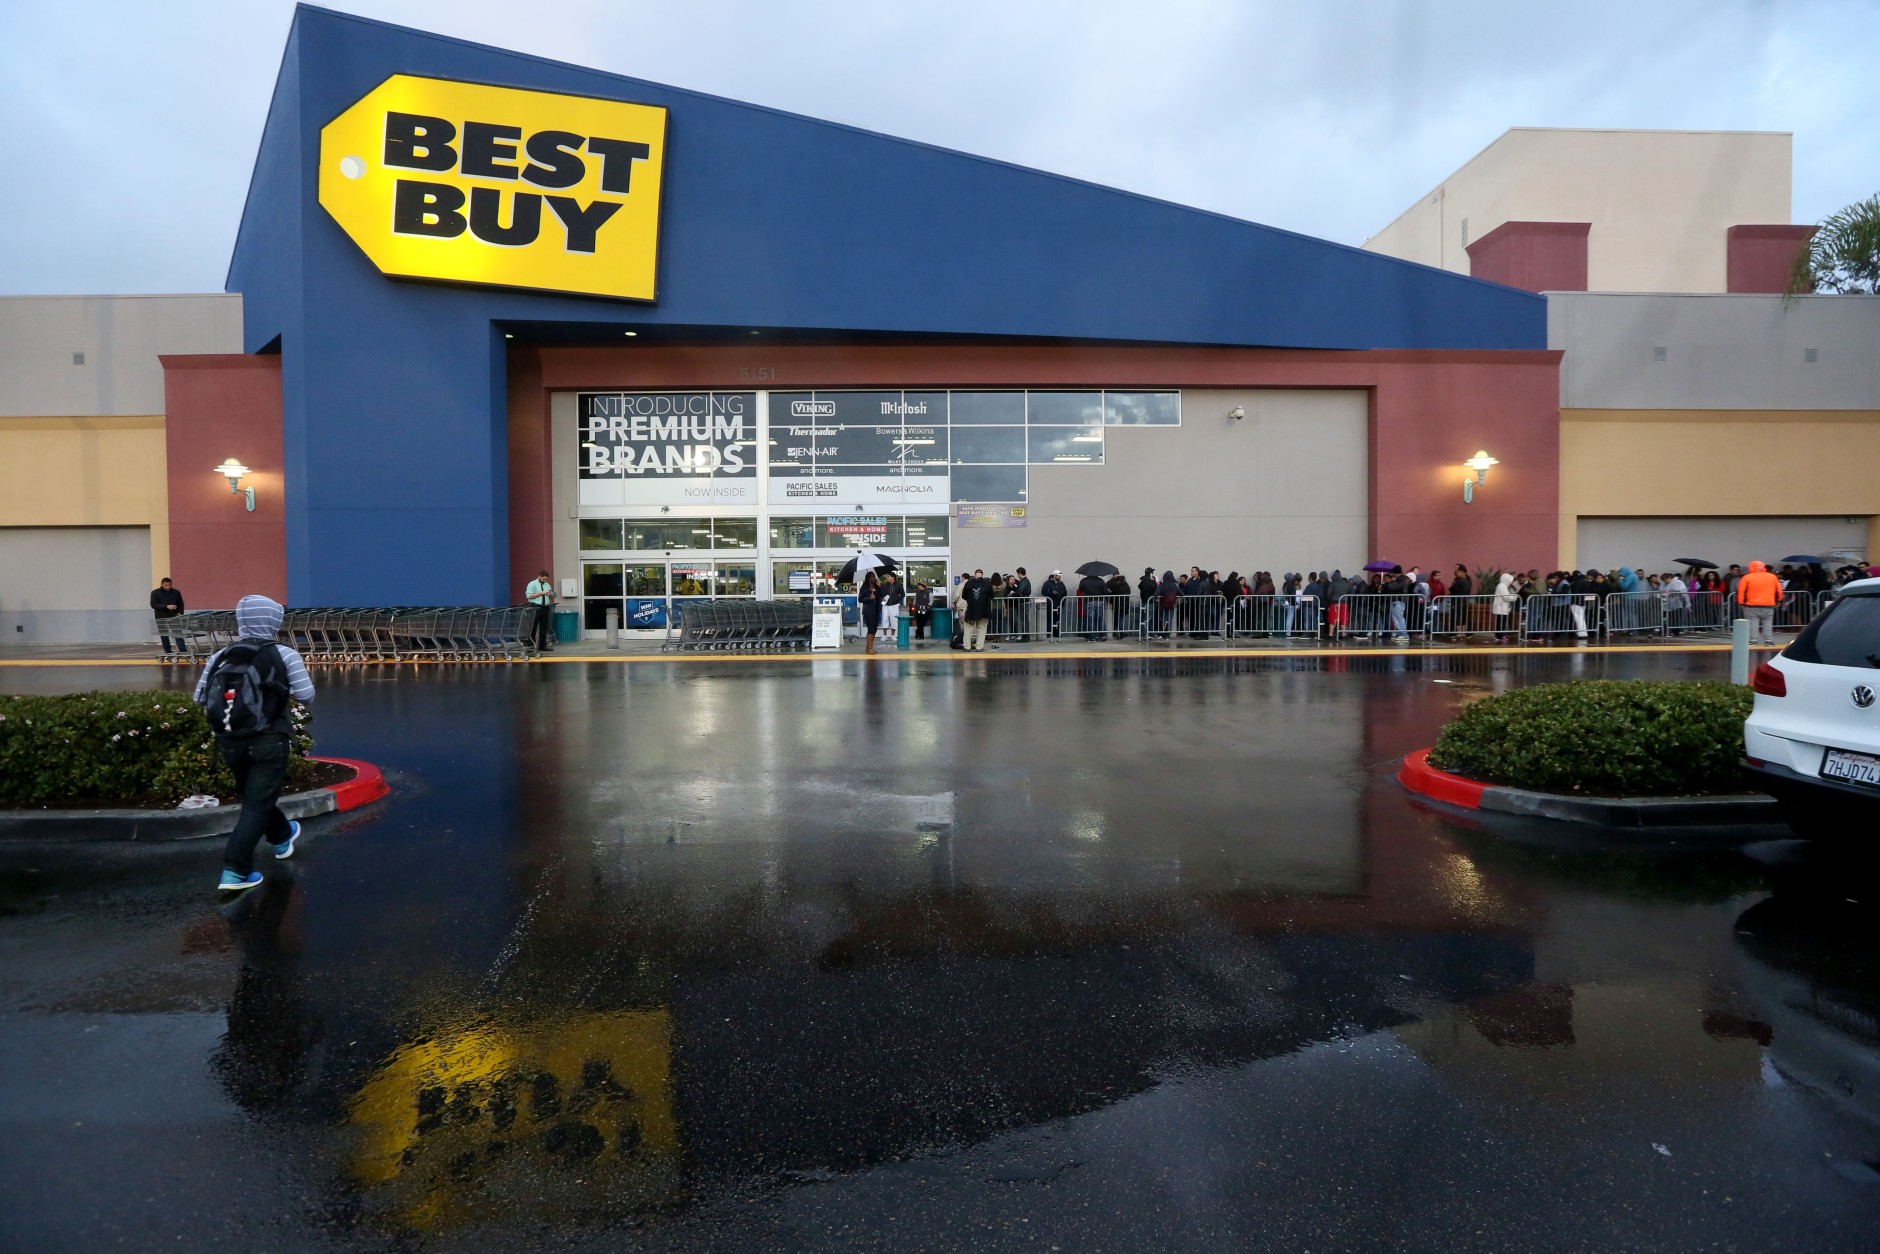 SAN DIEGO, CA - NOVEMBER 26:  Shoppers wait in line to enter a Best Buy on November 26, 2015 in San Diego, California.  Although Black Friday sales are expected to be strong, many shoppers are opting to buy online or retailers are offering year round sales and other incentives that are expected to ease crowds. (Photo by Sandy Huffaker/Getty Images)